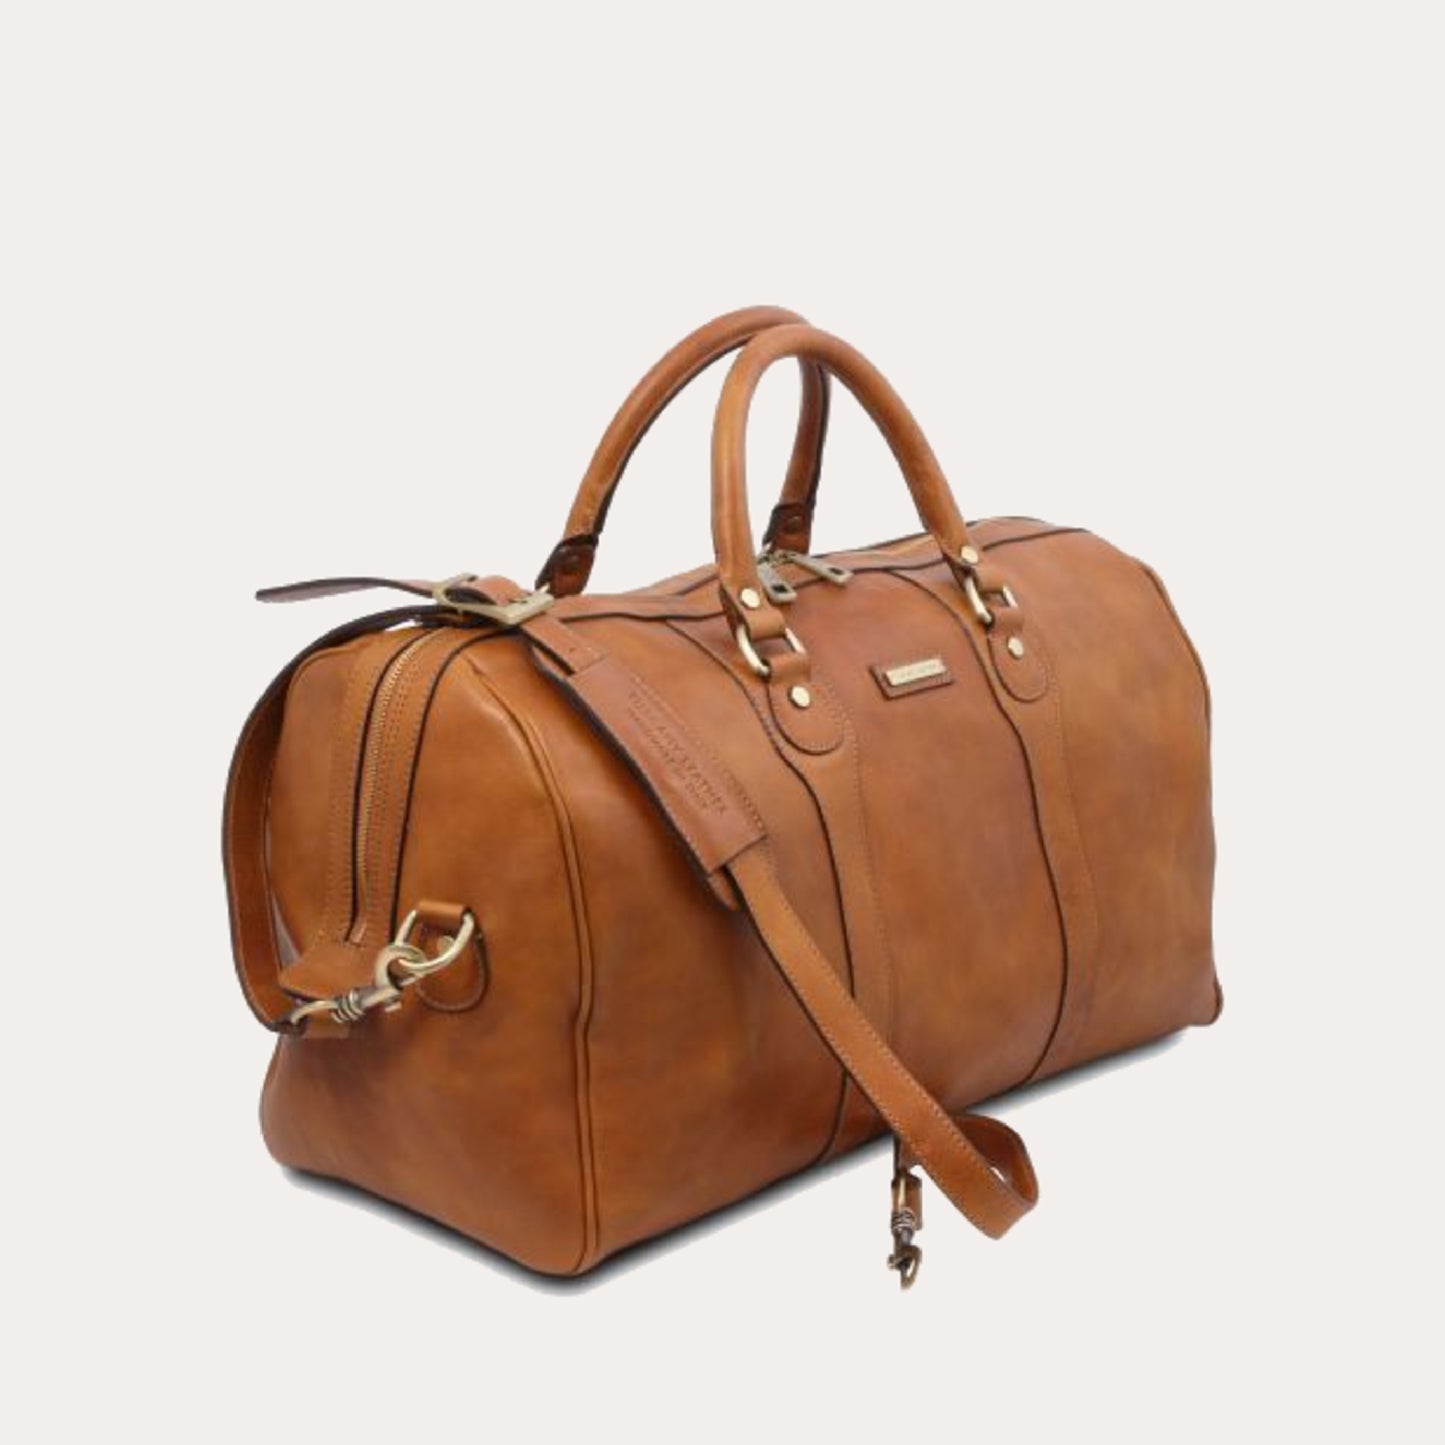 Tuscany Leather Natural Leather Travel Bag